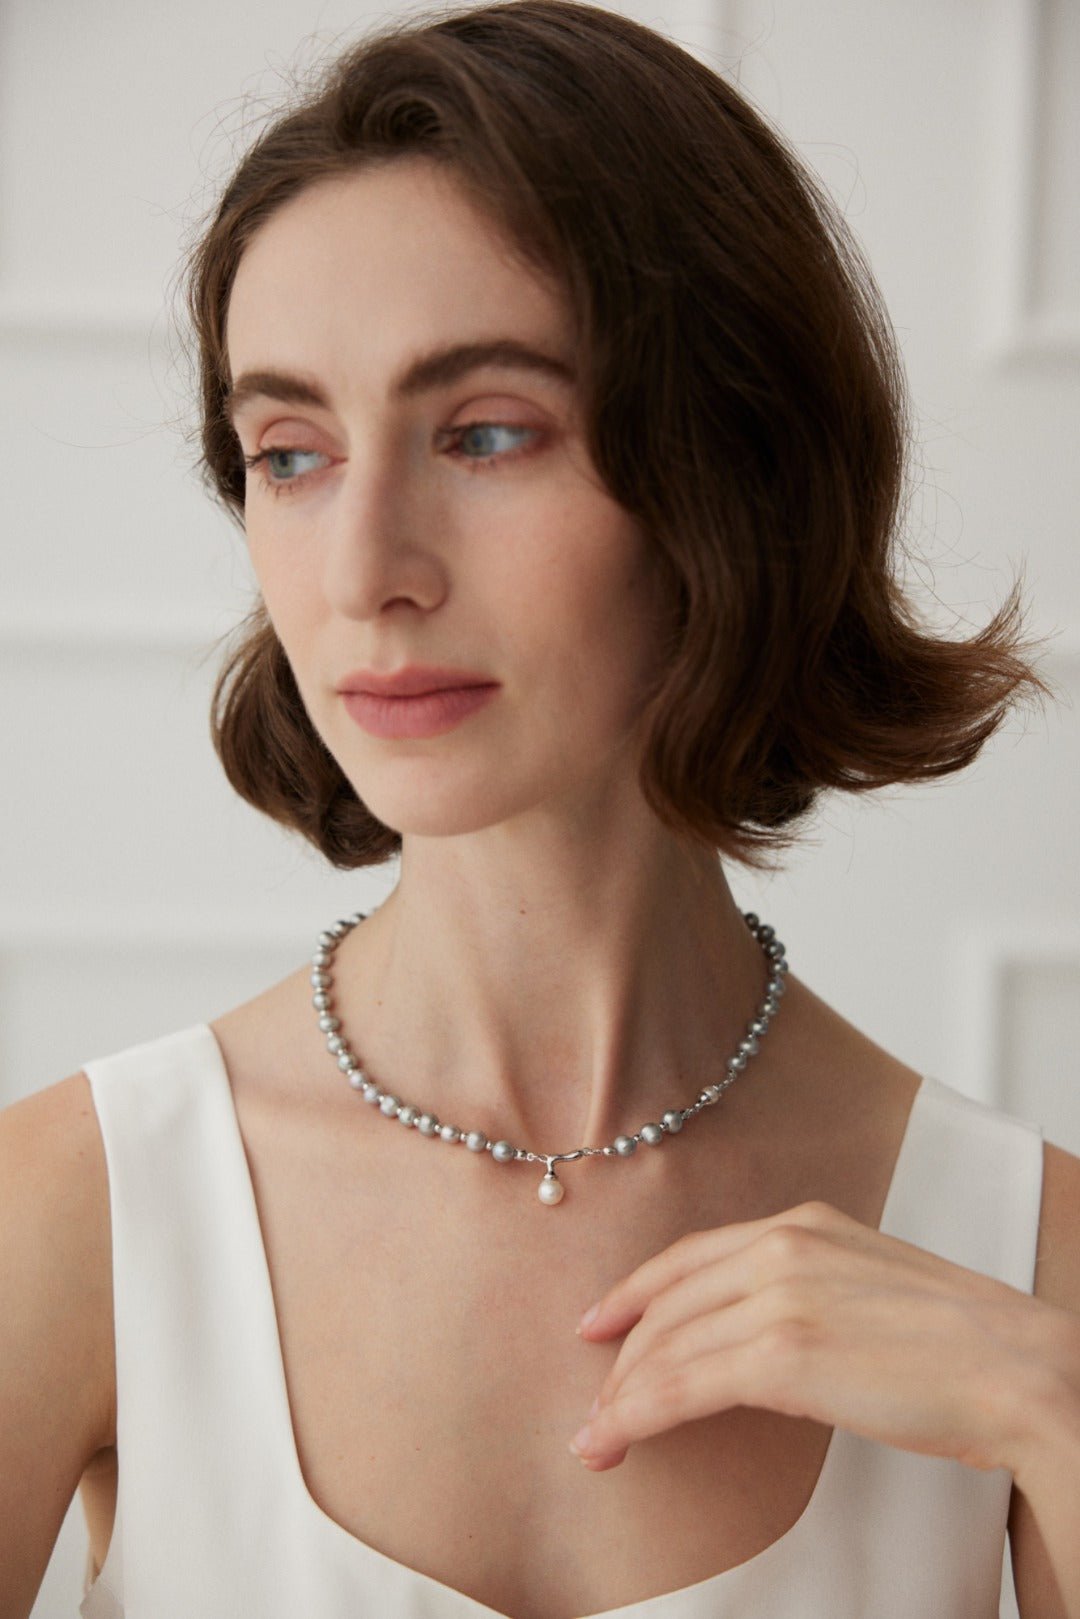 Mini Silver Ball Paired with Platinum-Colored Pearl Pendant Necklace - floysun